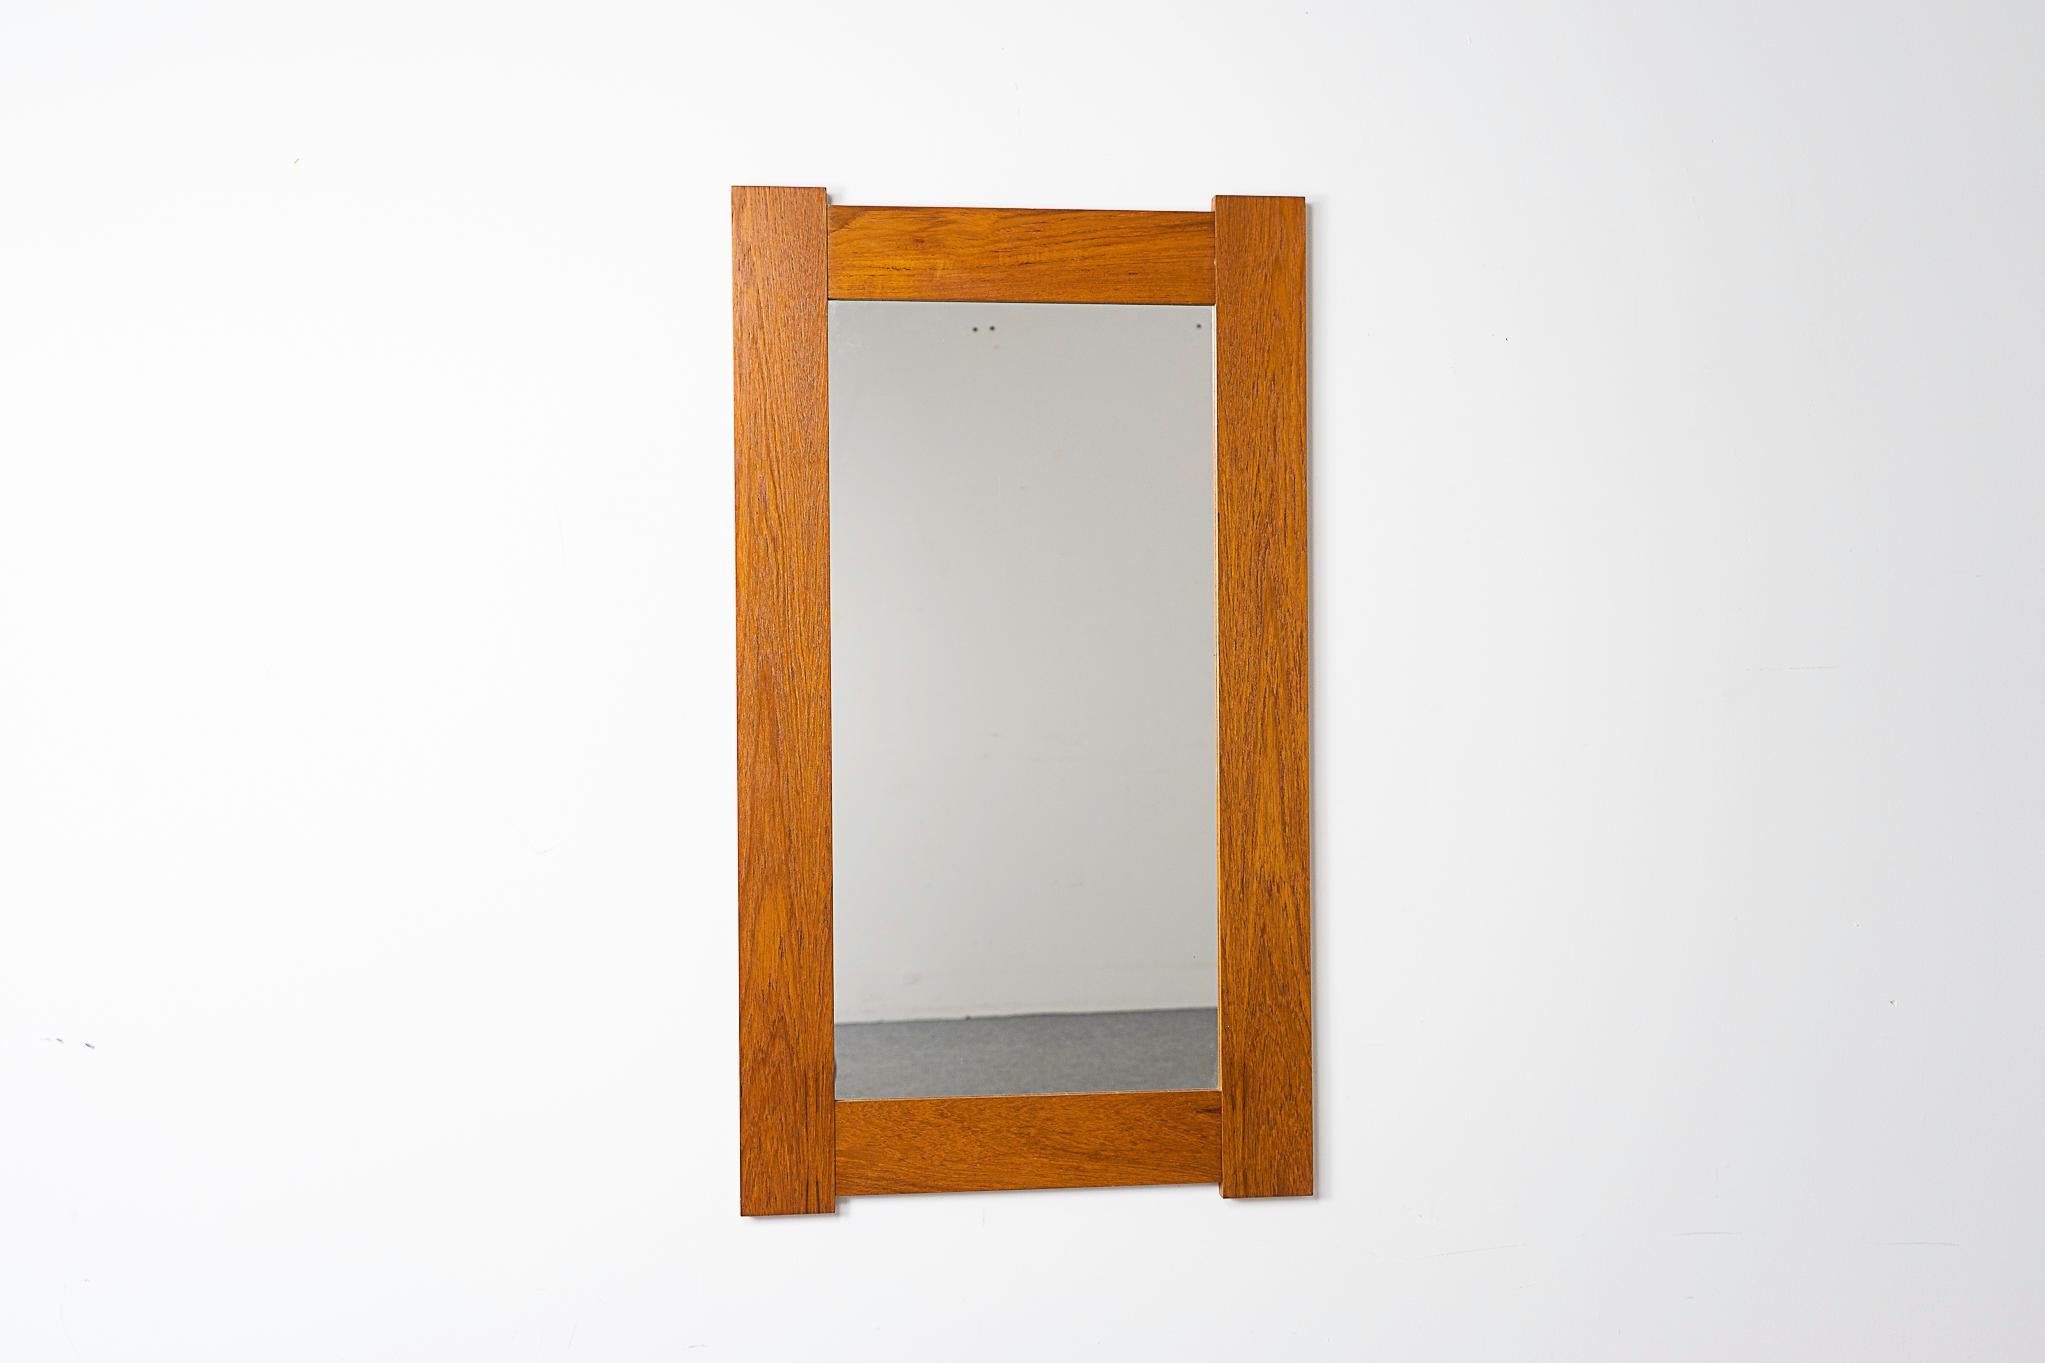 Teak Danish mirror, circa 1960's. A perfect compliment to any interior! The glowing tone will warm up any interior.

Please inquire for remote and international shipping rates.